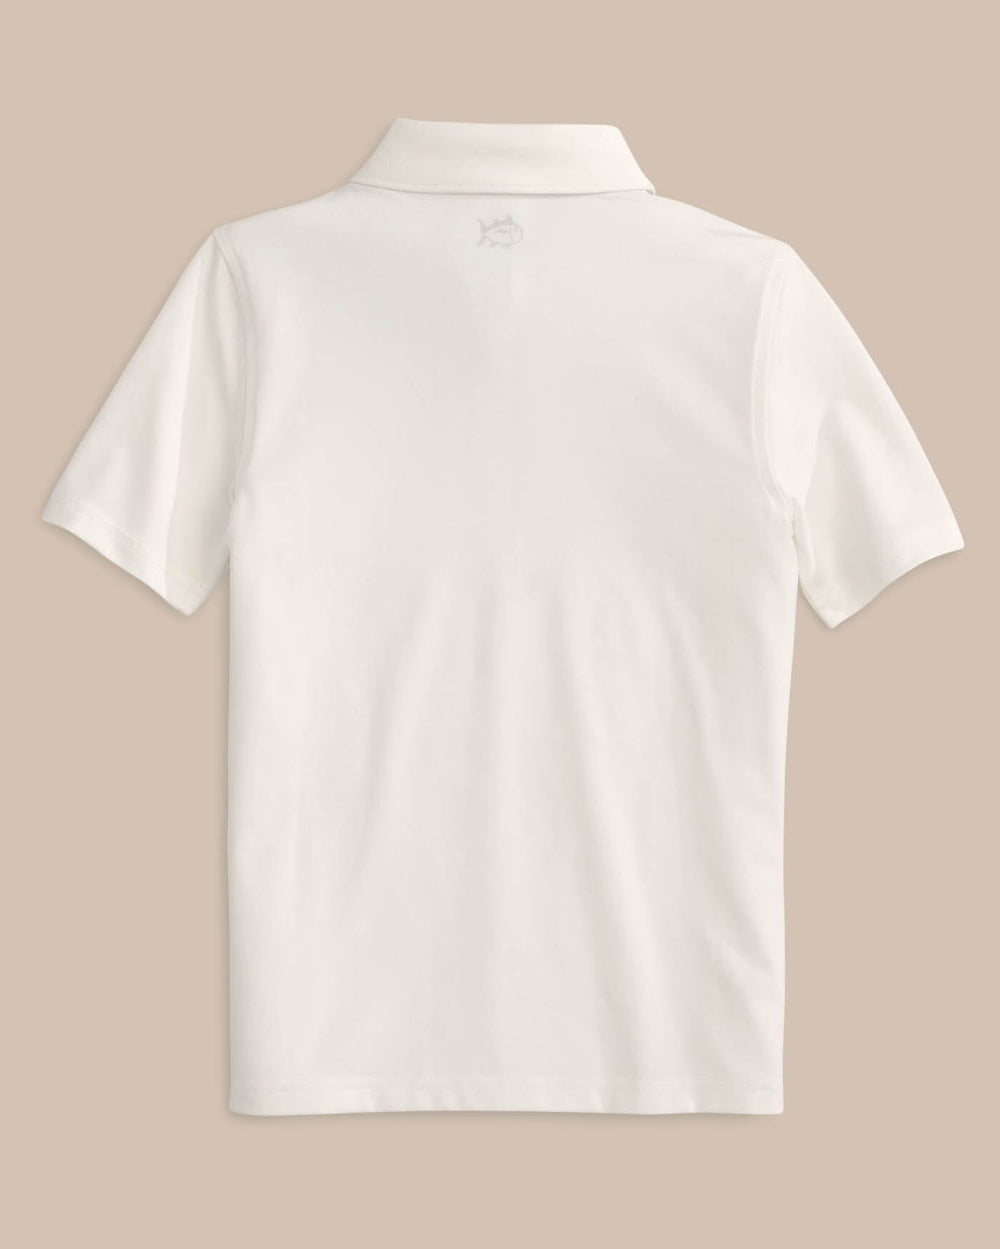 The back view of the Boys Driver Performance Polo Shirt by Southern Tide - Classic White